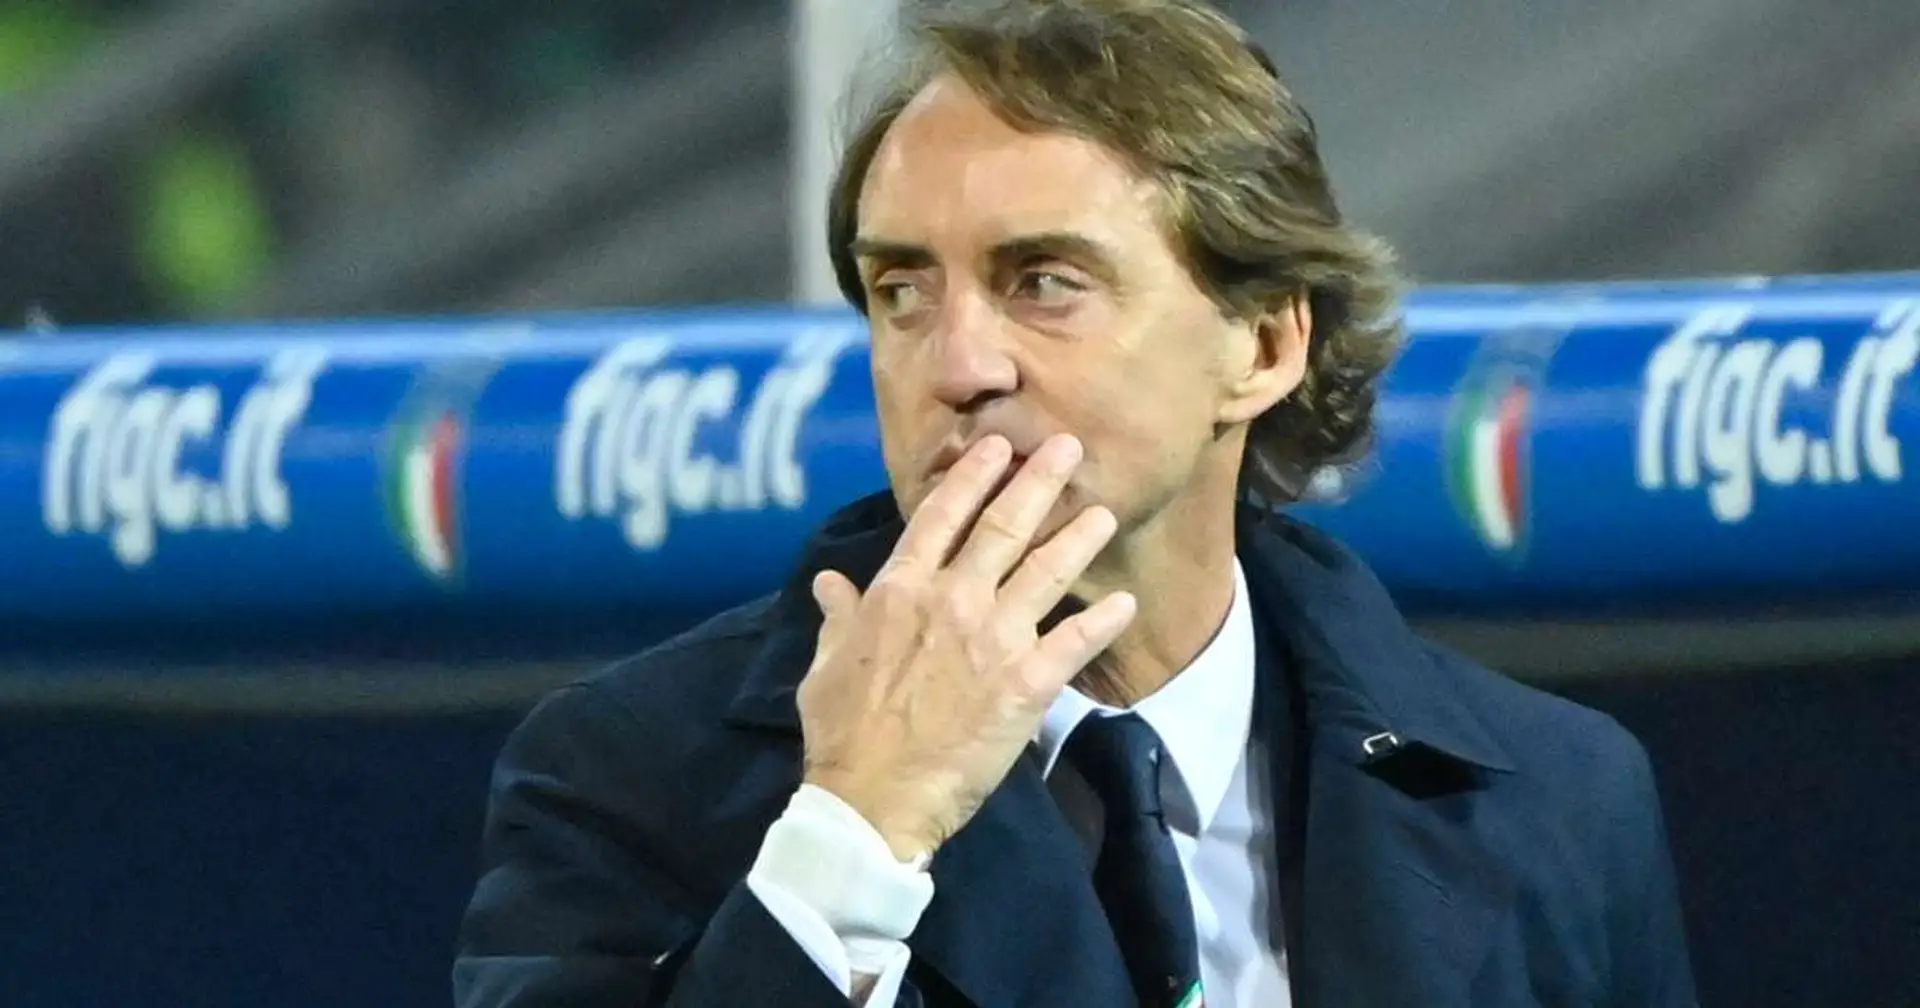 Roberto Mancini will stay as Italy manager despite World Cup humiliation